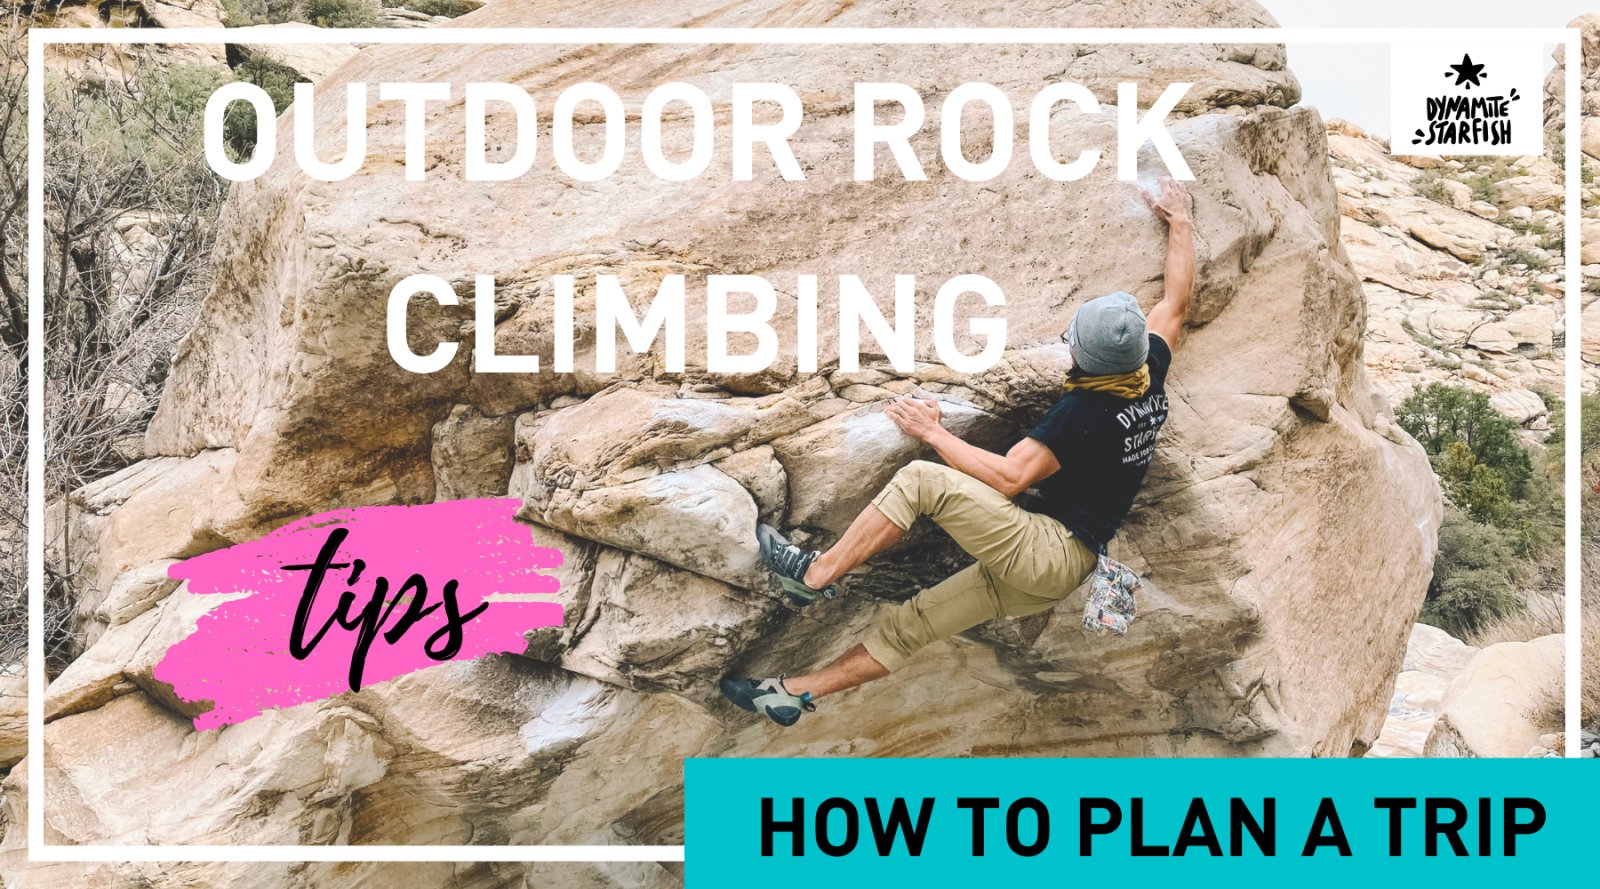 How To Plan For An Outdoor Rock Climbing Trip - Dynamite Starfish